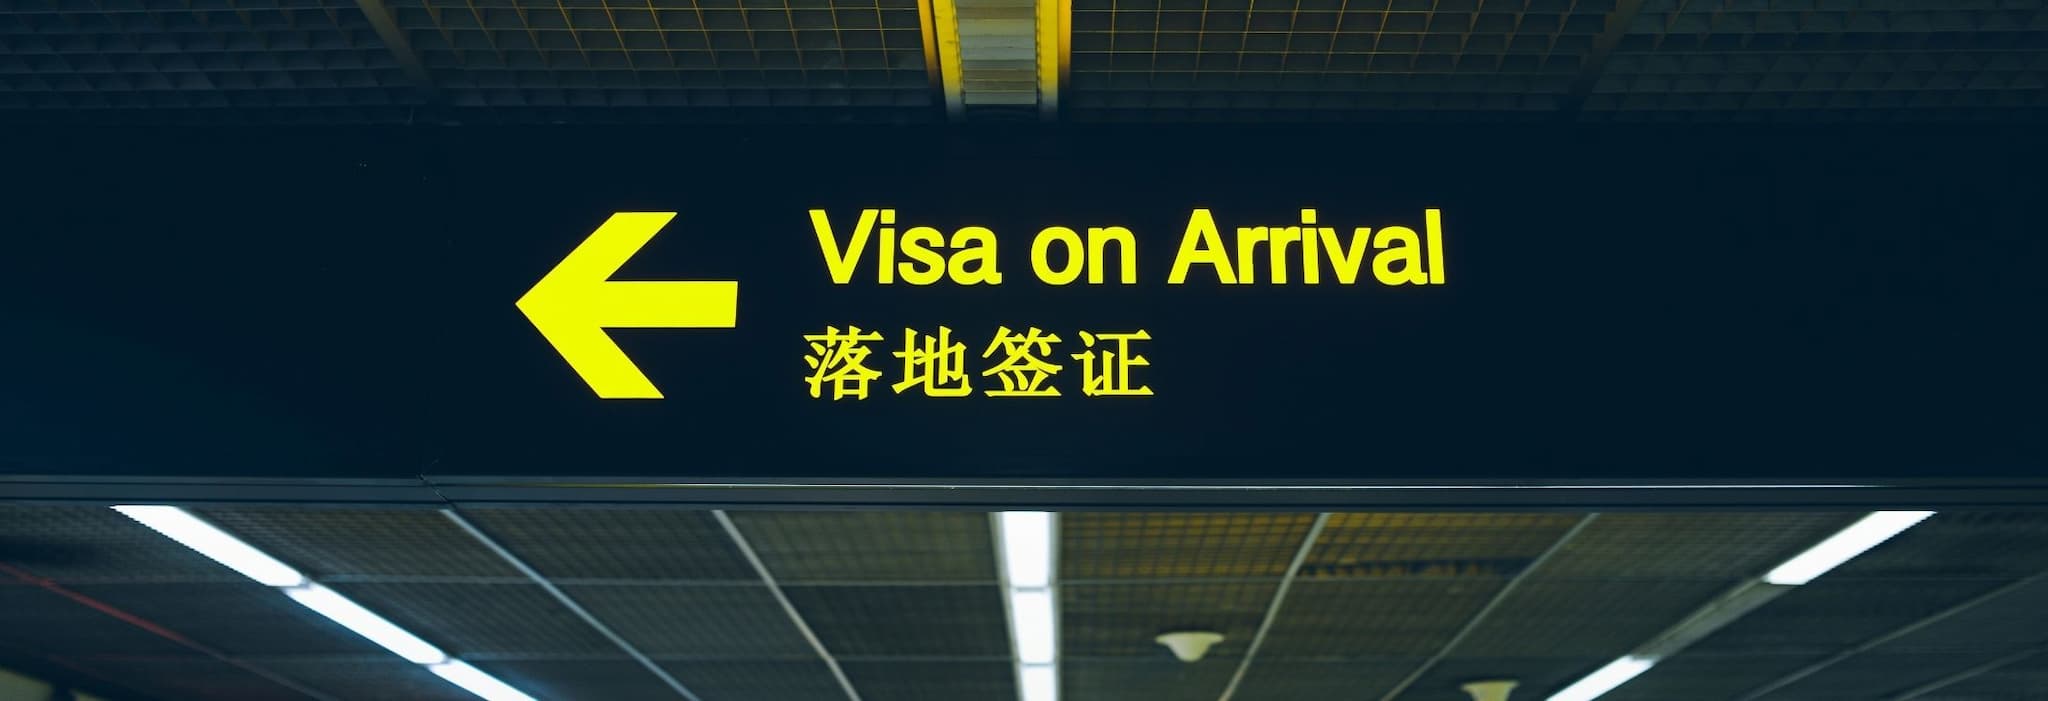 Travel made easy with Visa on Arrival